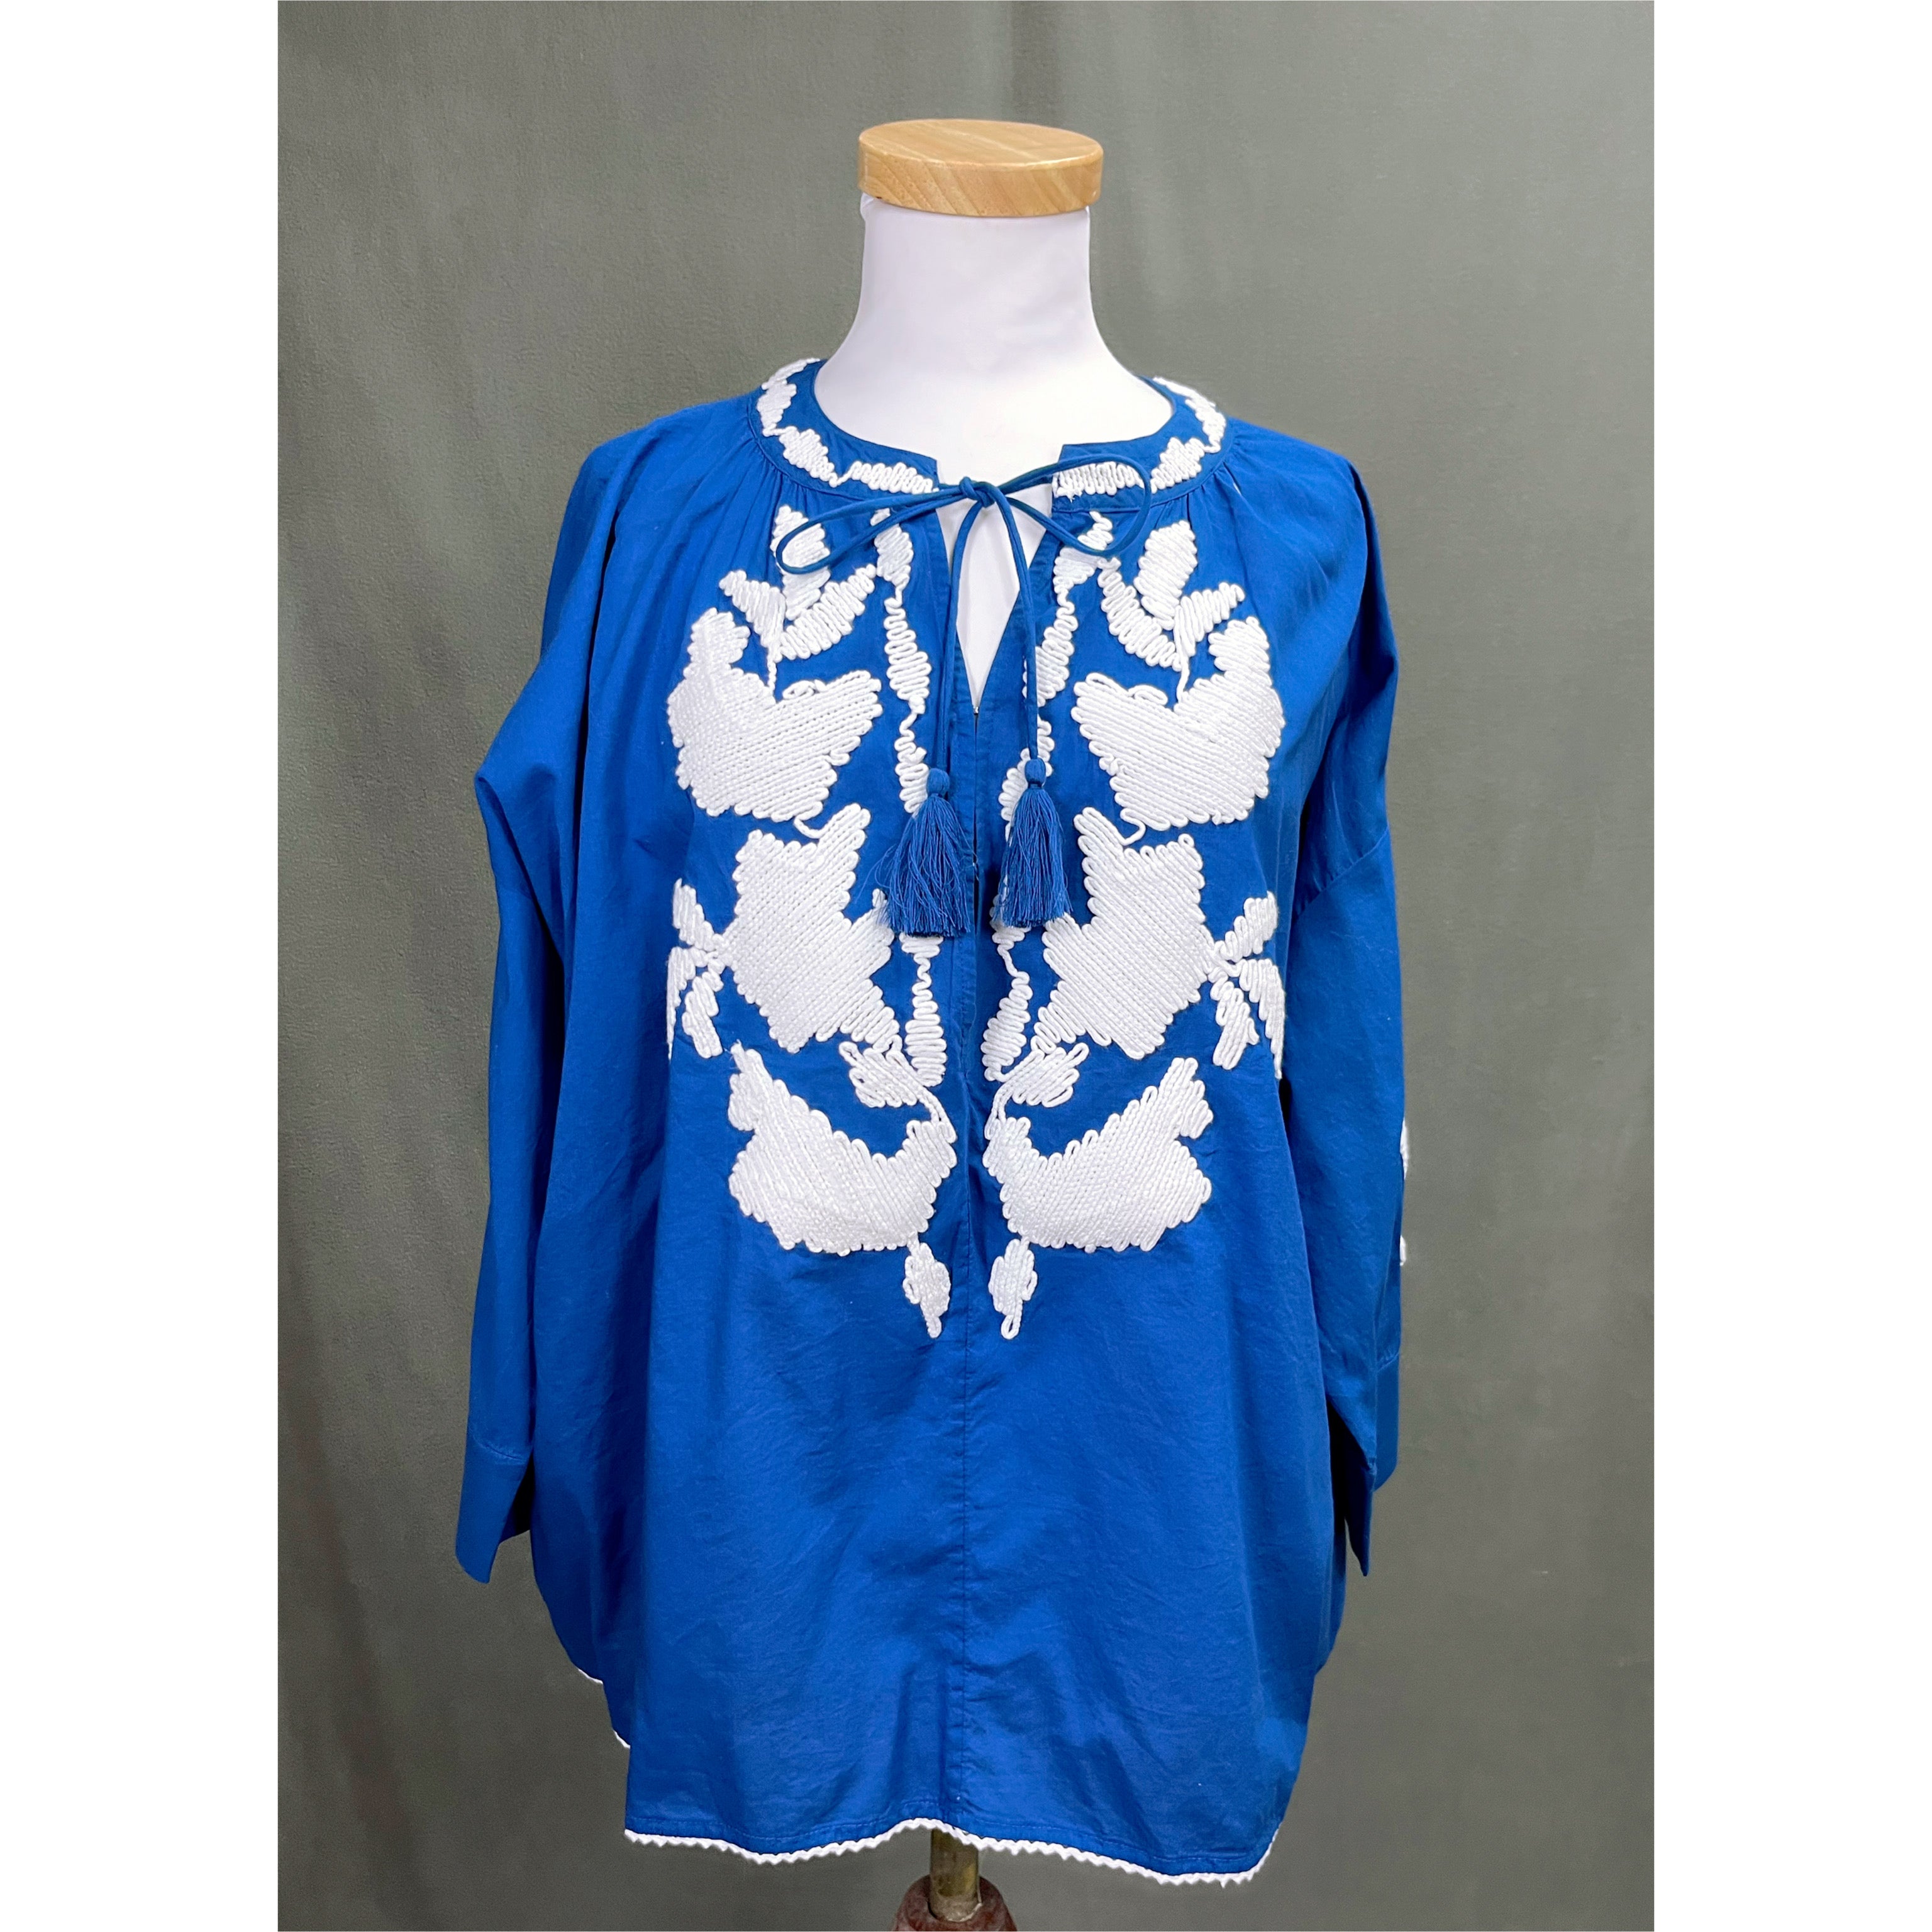 Chico's cobalt blue blouse, size M, NEW WITH TAGS!